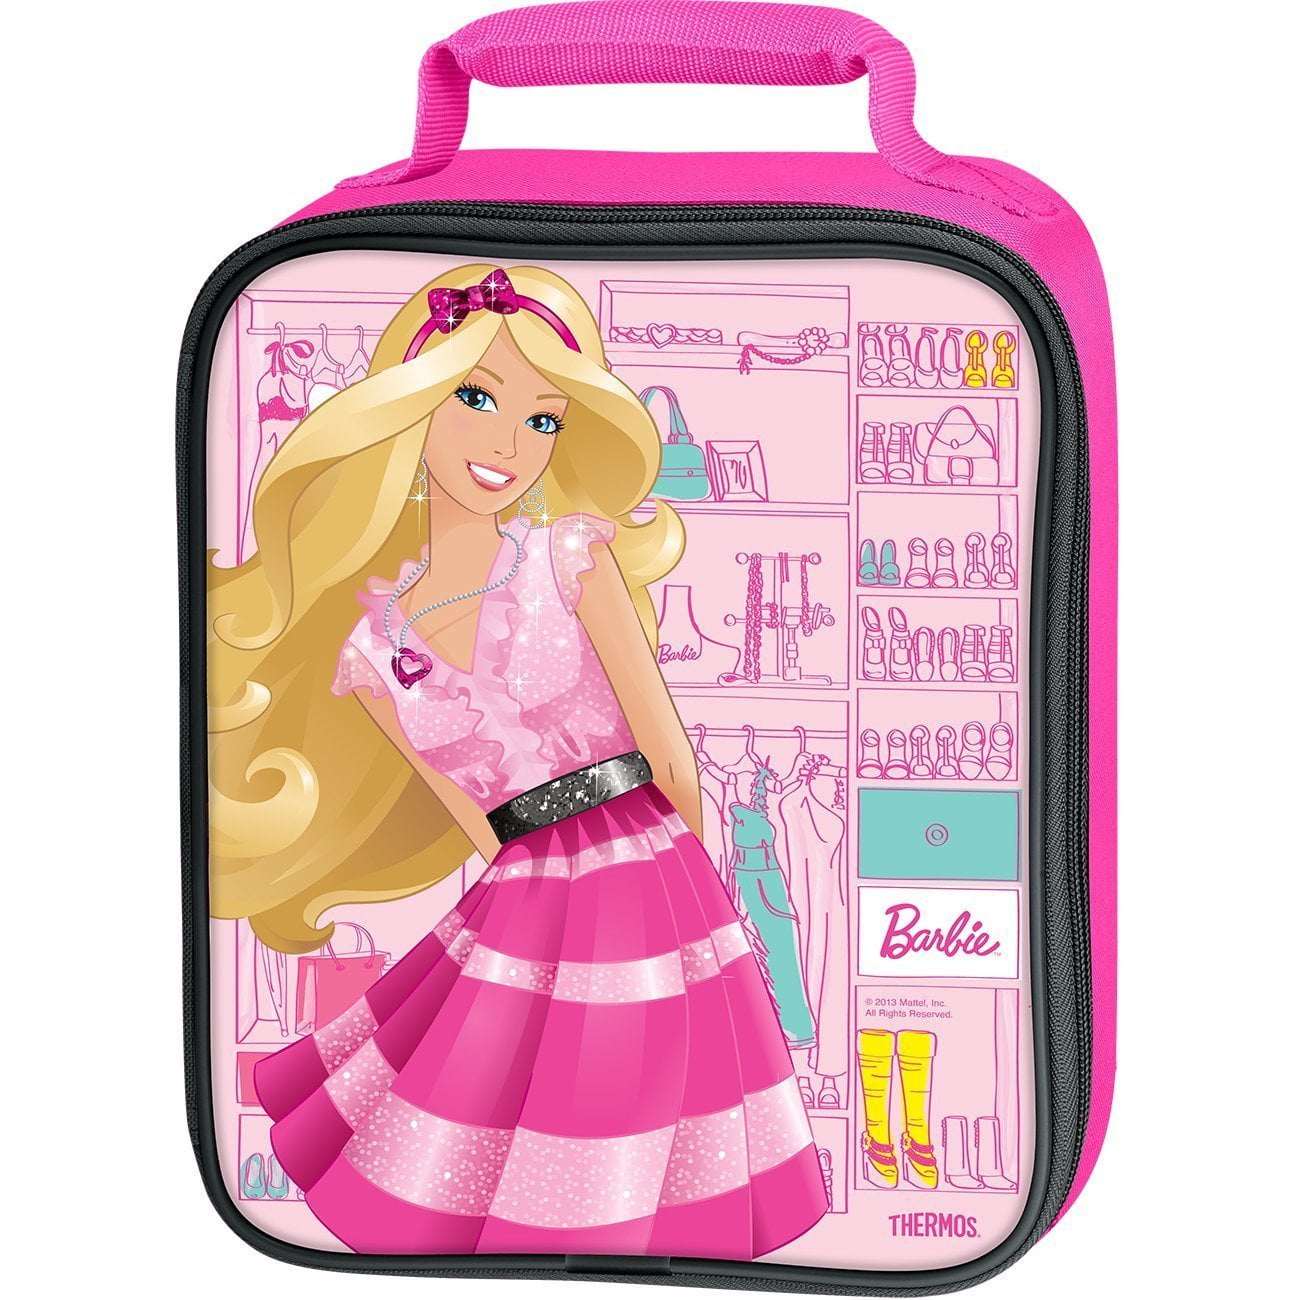 Barbie Thermos Must haves!!! #thermos #thermocups #lunchbags #lunchbox